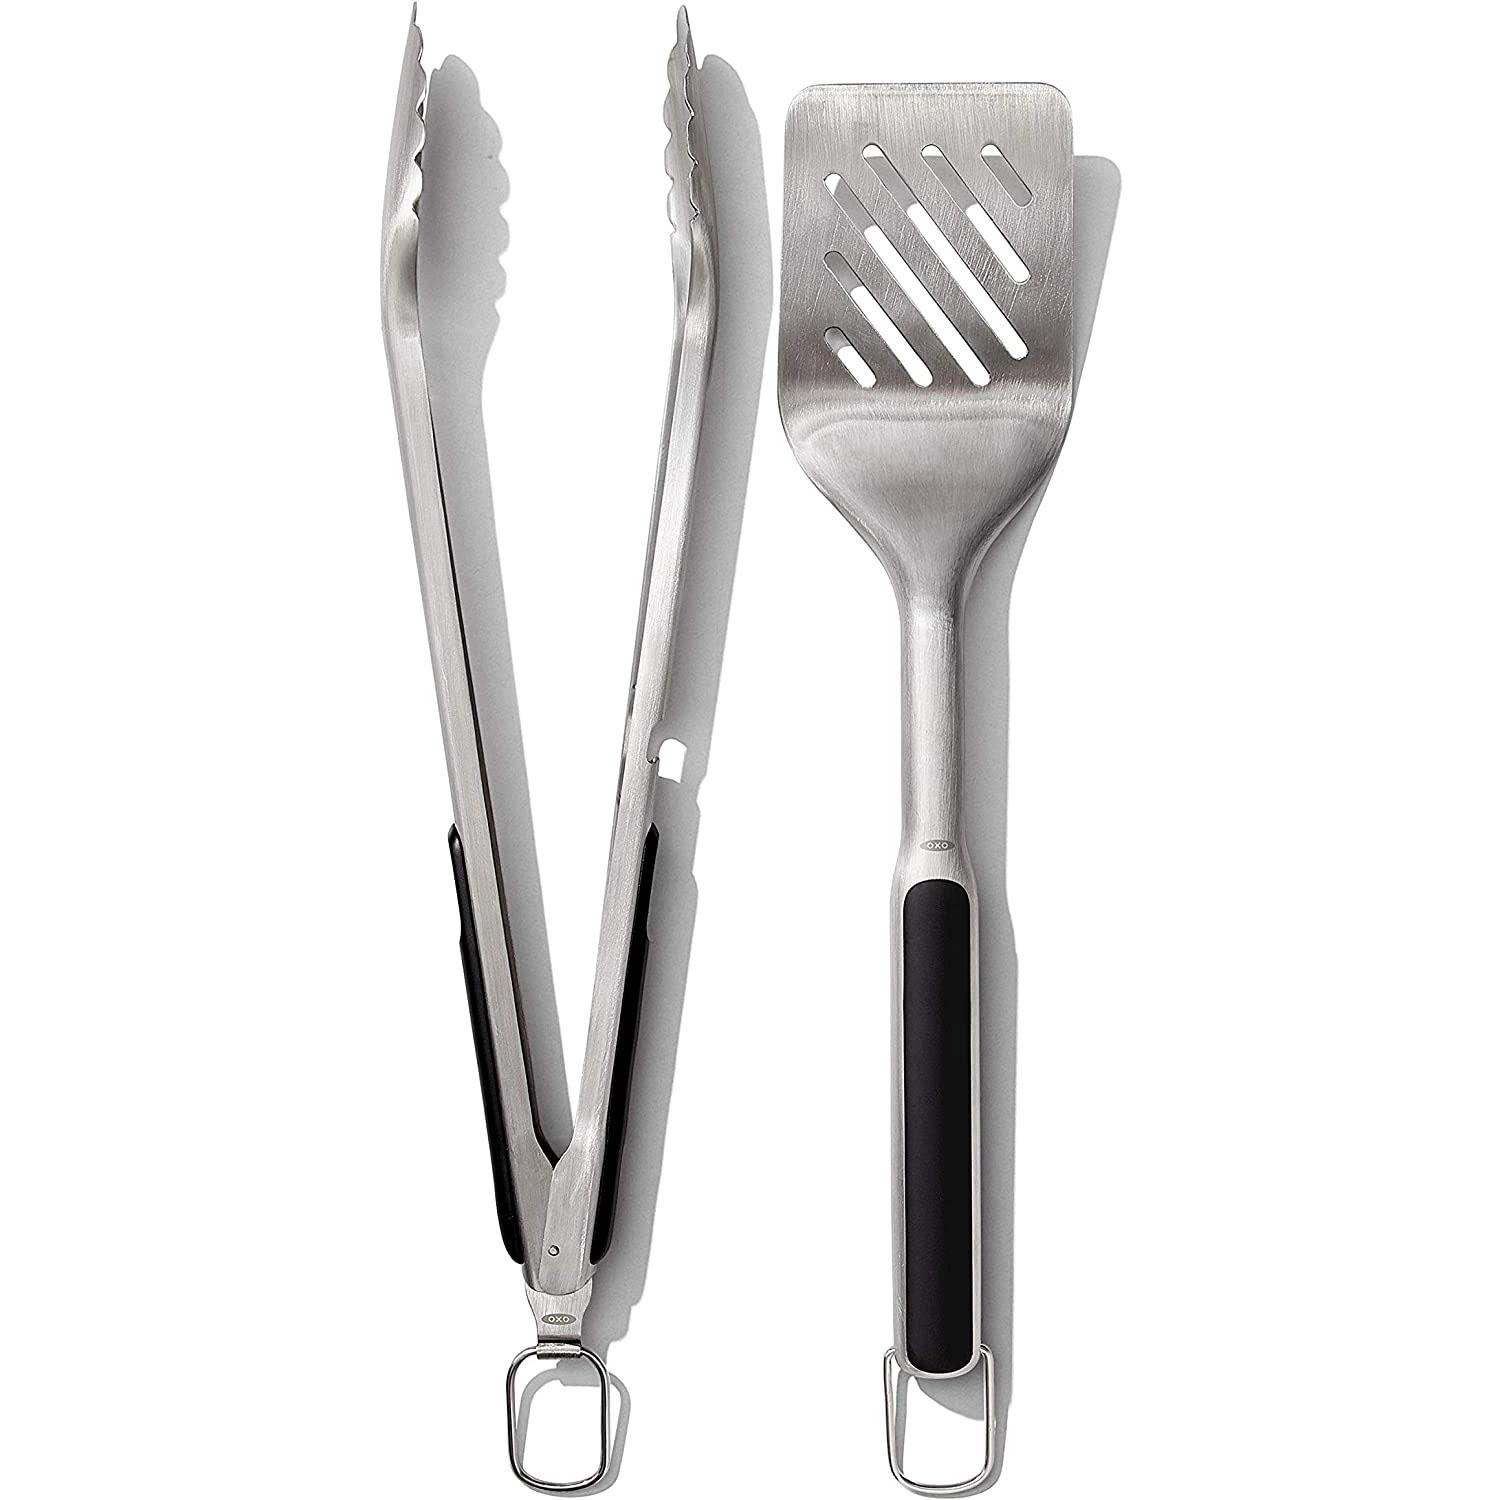 OXO Good Grips Grilling Tools Tongs & Turner Set for $10.83